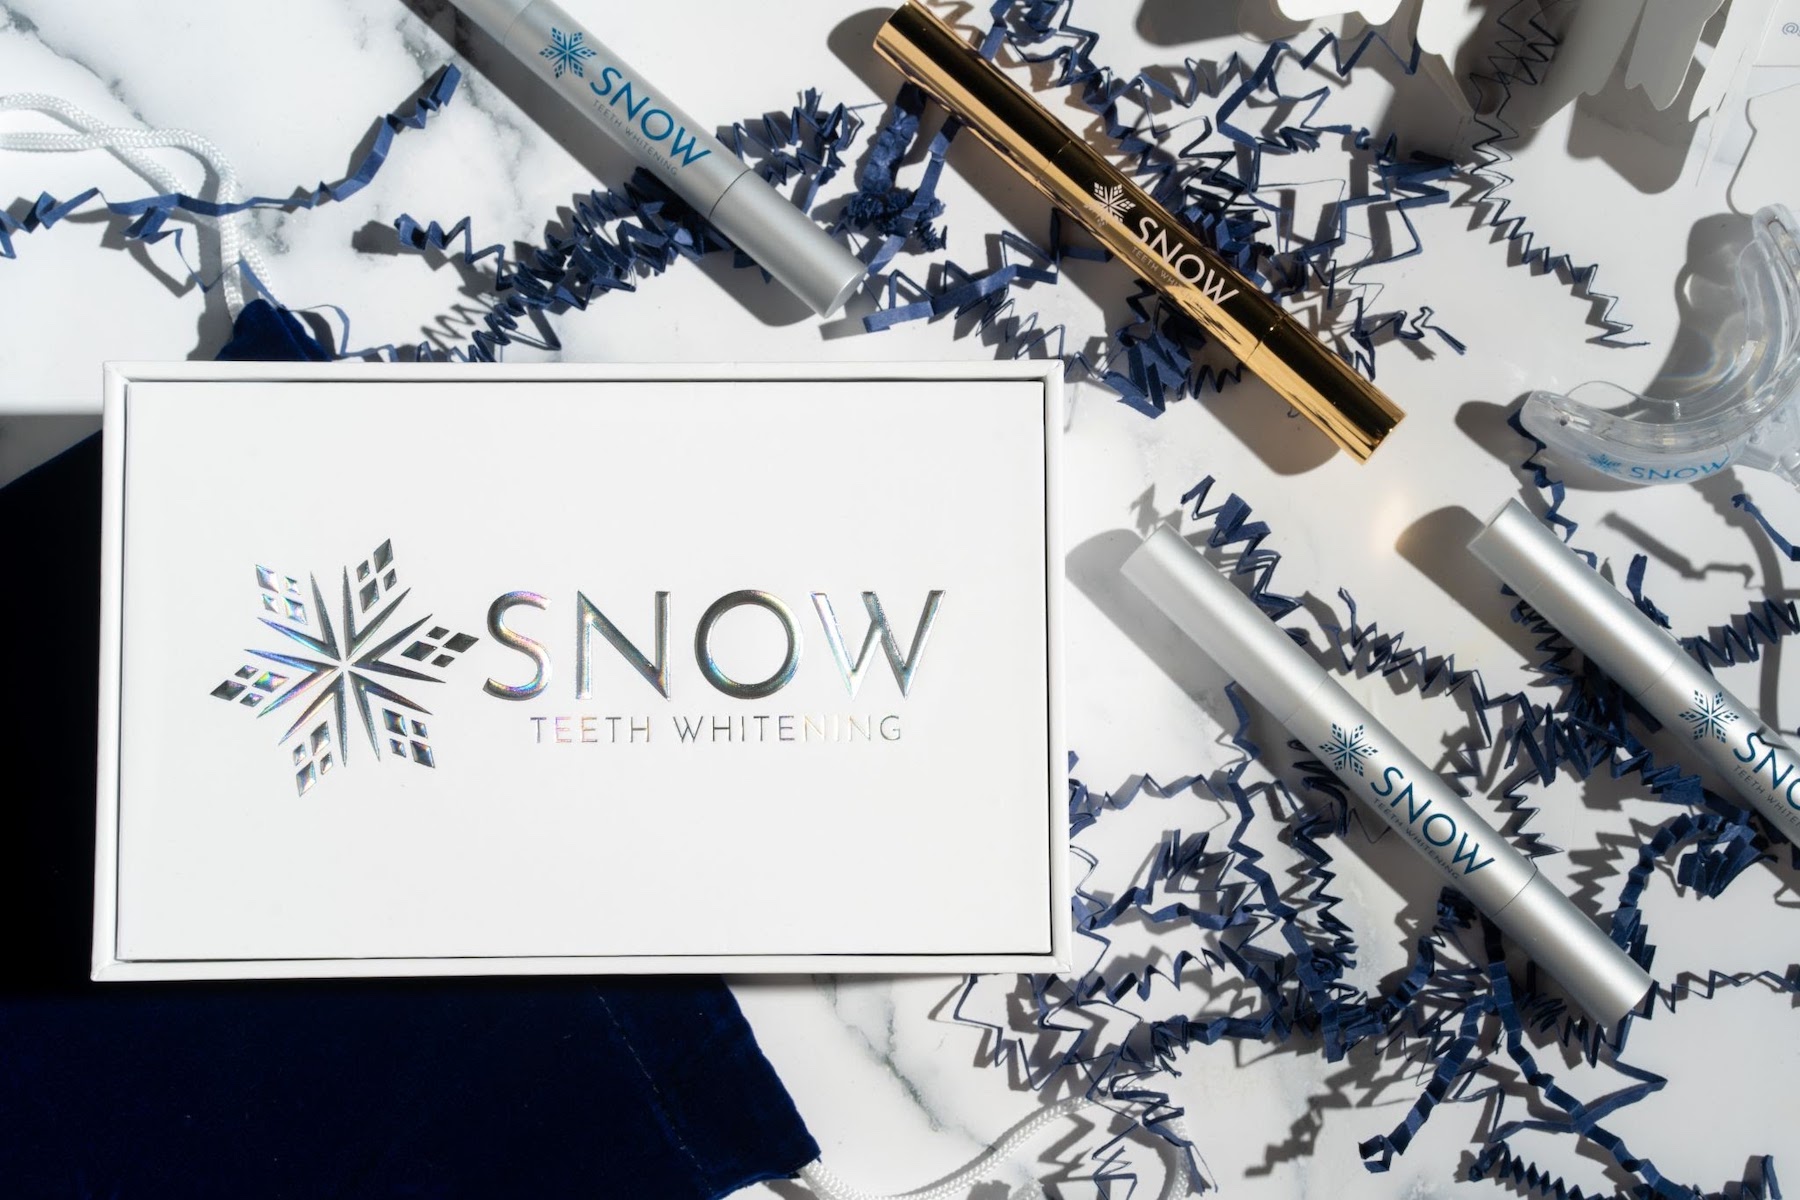 Facts About High Price Snow Teeth Whitening Revealed